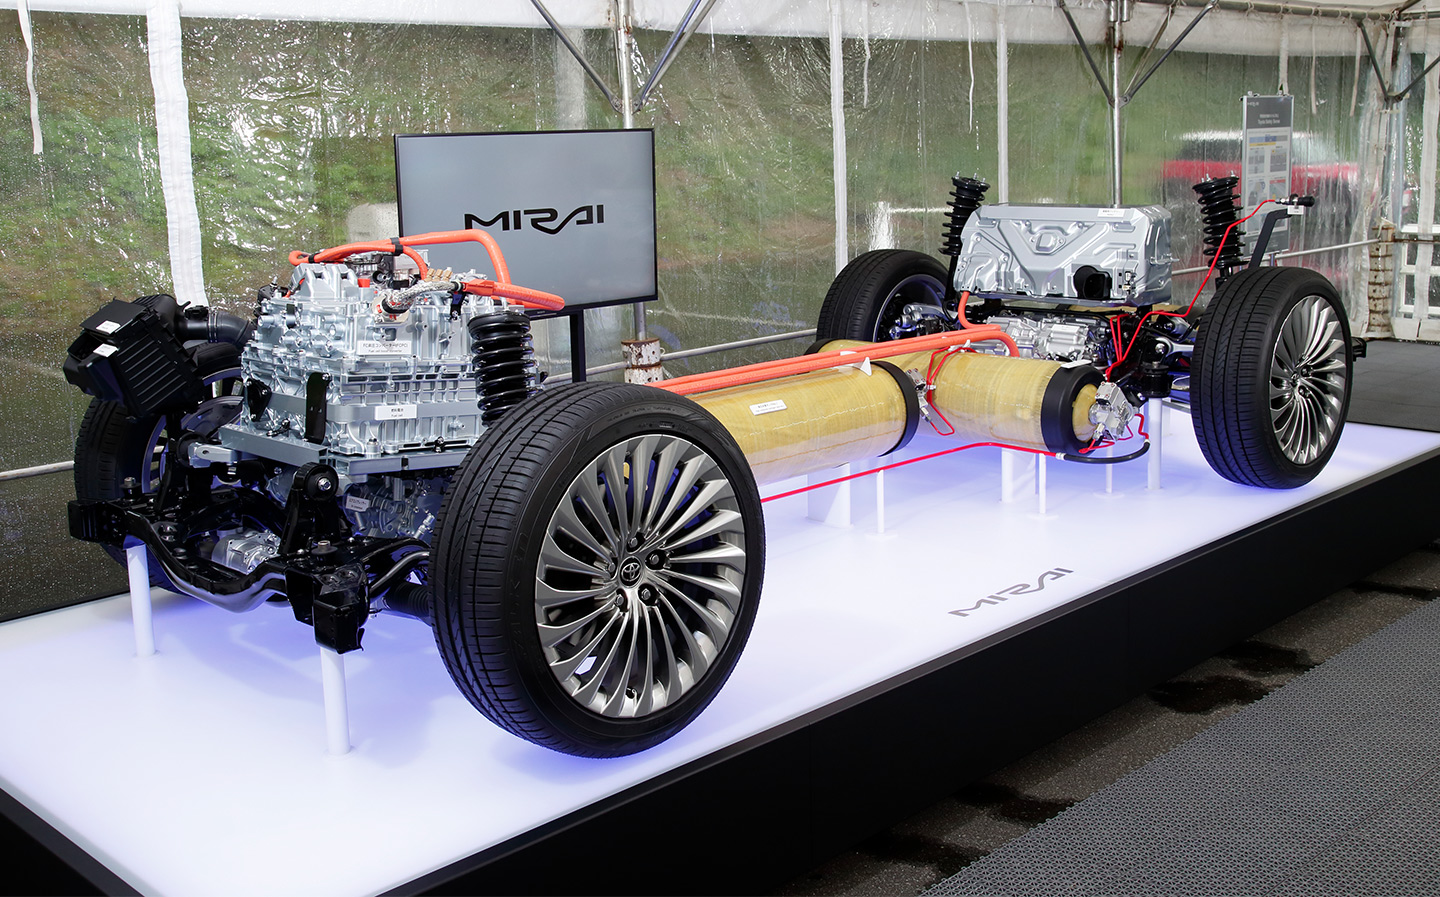 Toyota Mirai hydrogen tanks and fuel cell stack cutaway